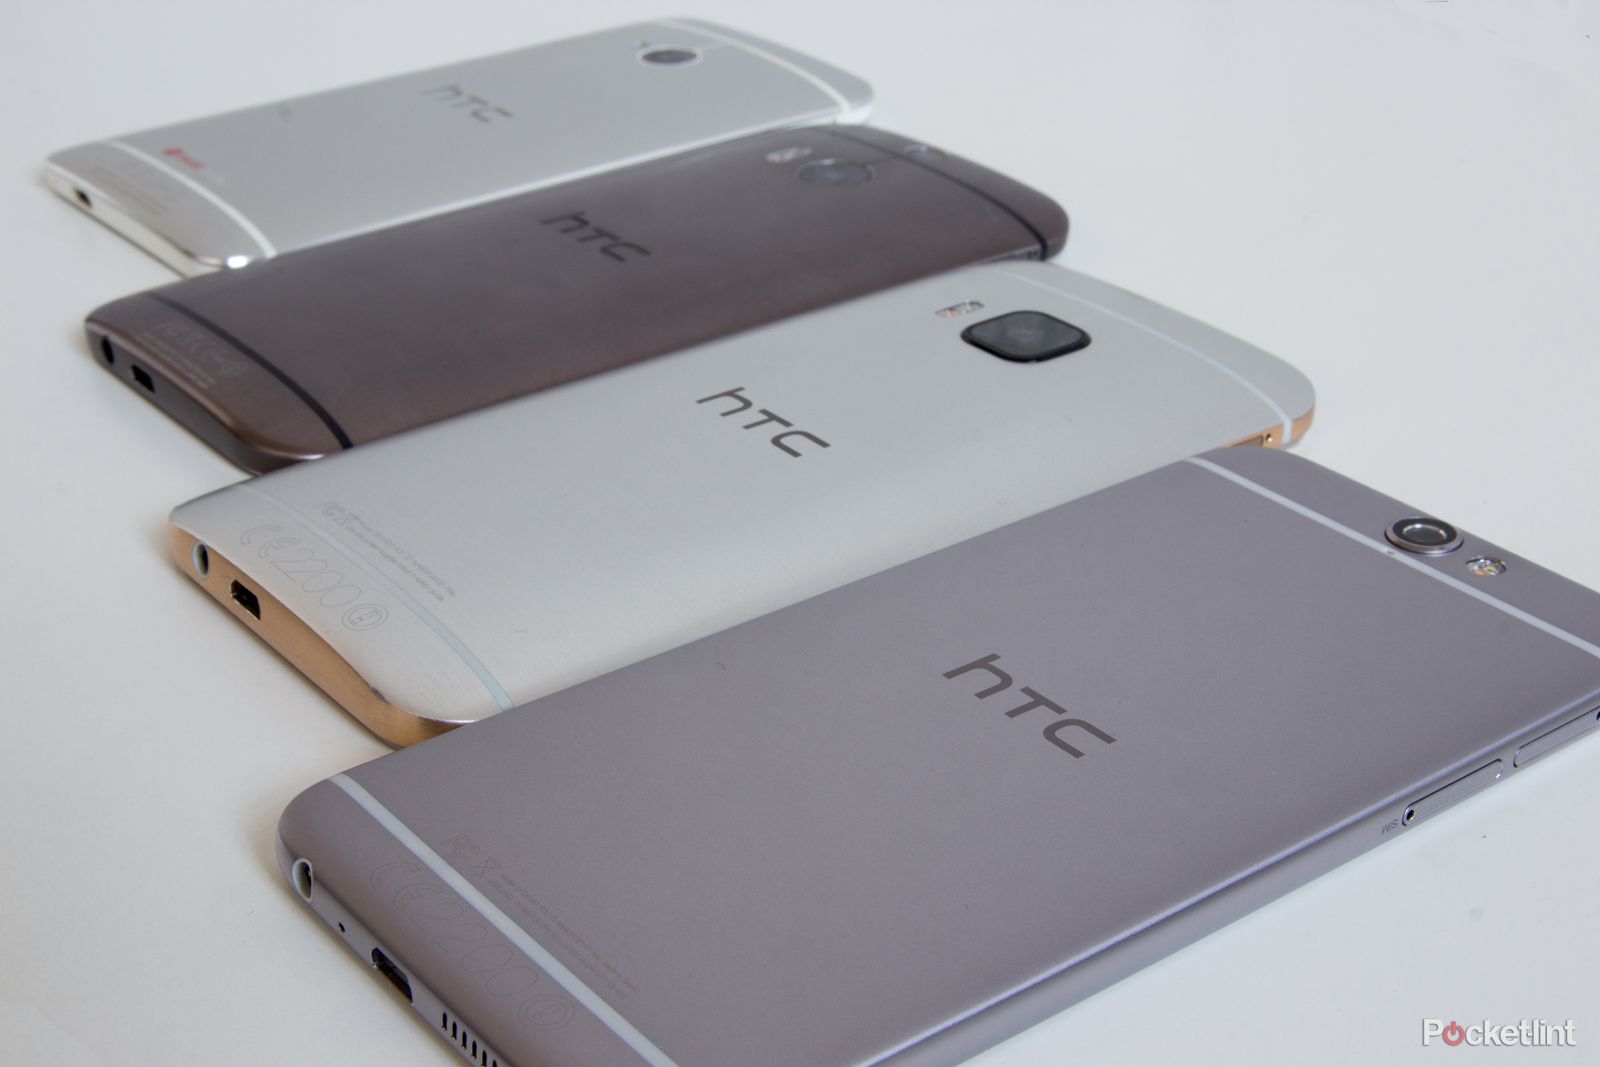 htc one a9 did htc just copy the iphone 6 design image 2